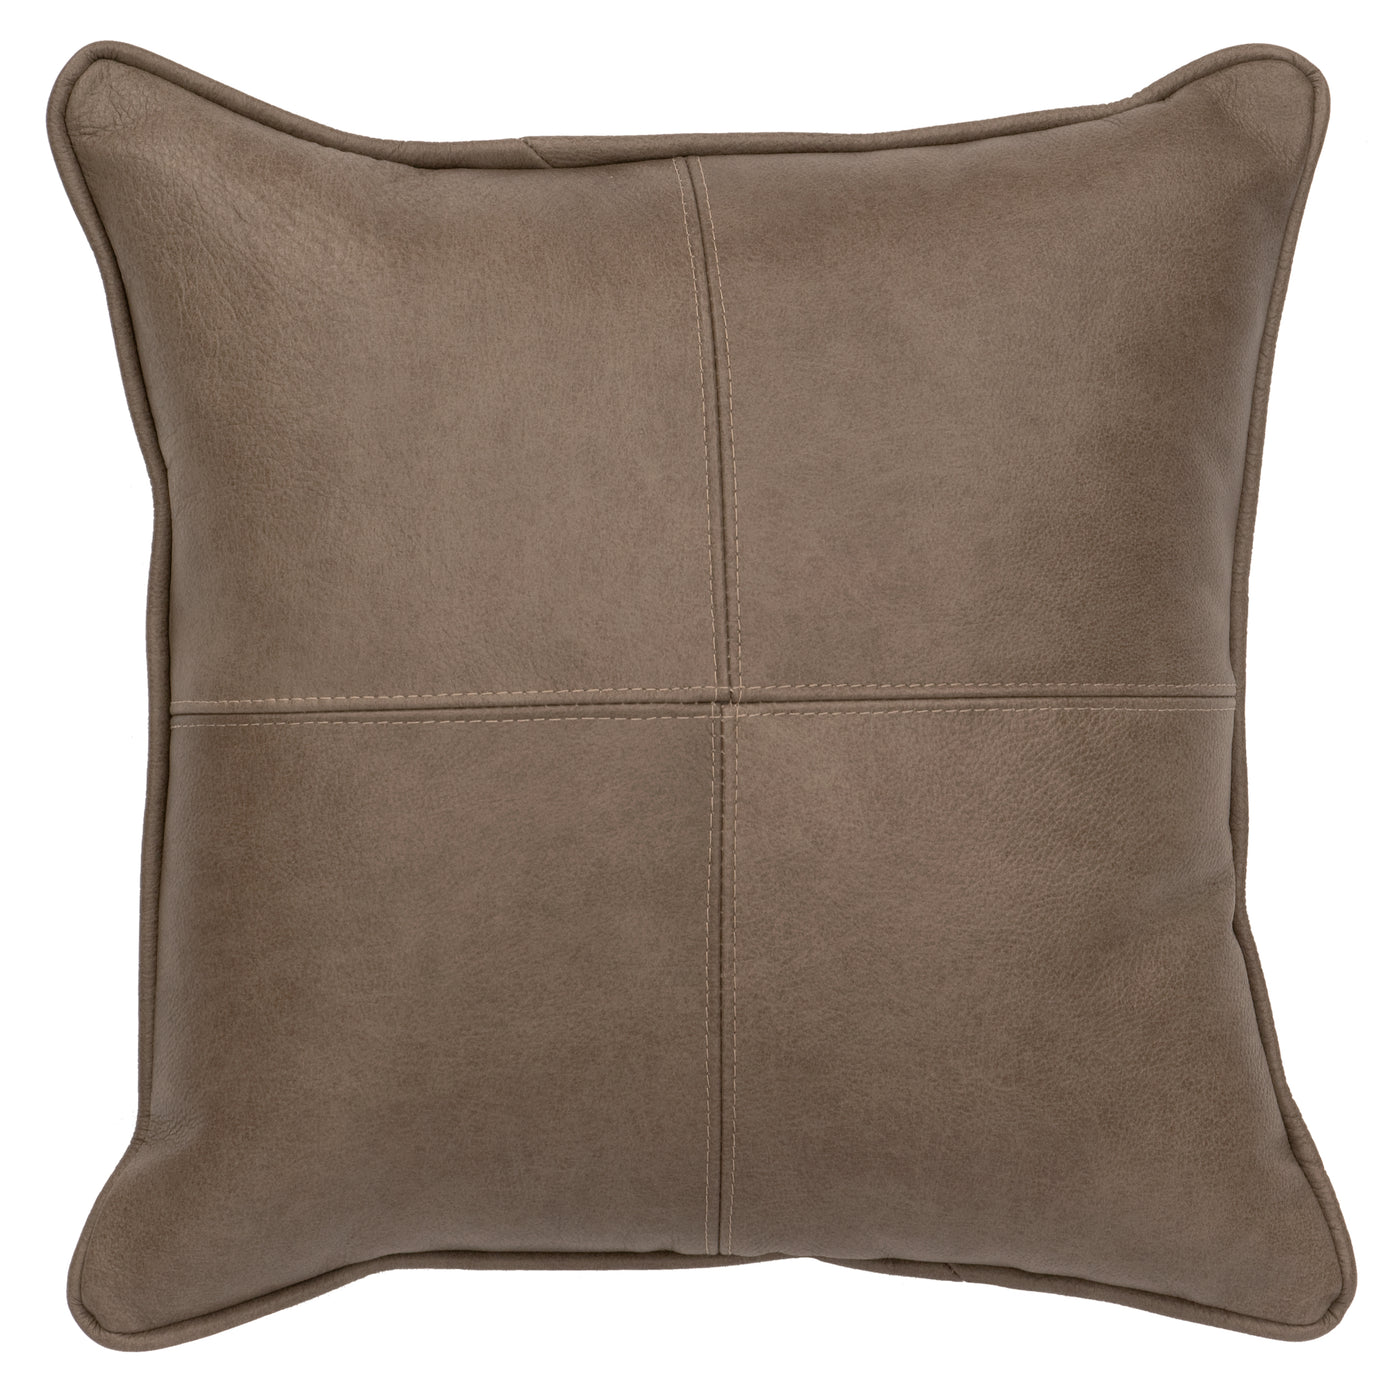 Canvello Silver Fox Leather Pillow - Leather Back - 16" x 16"